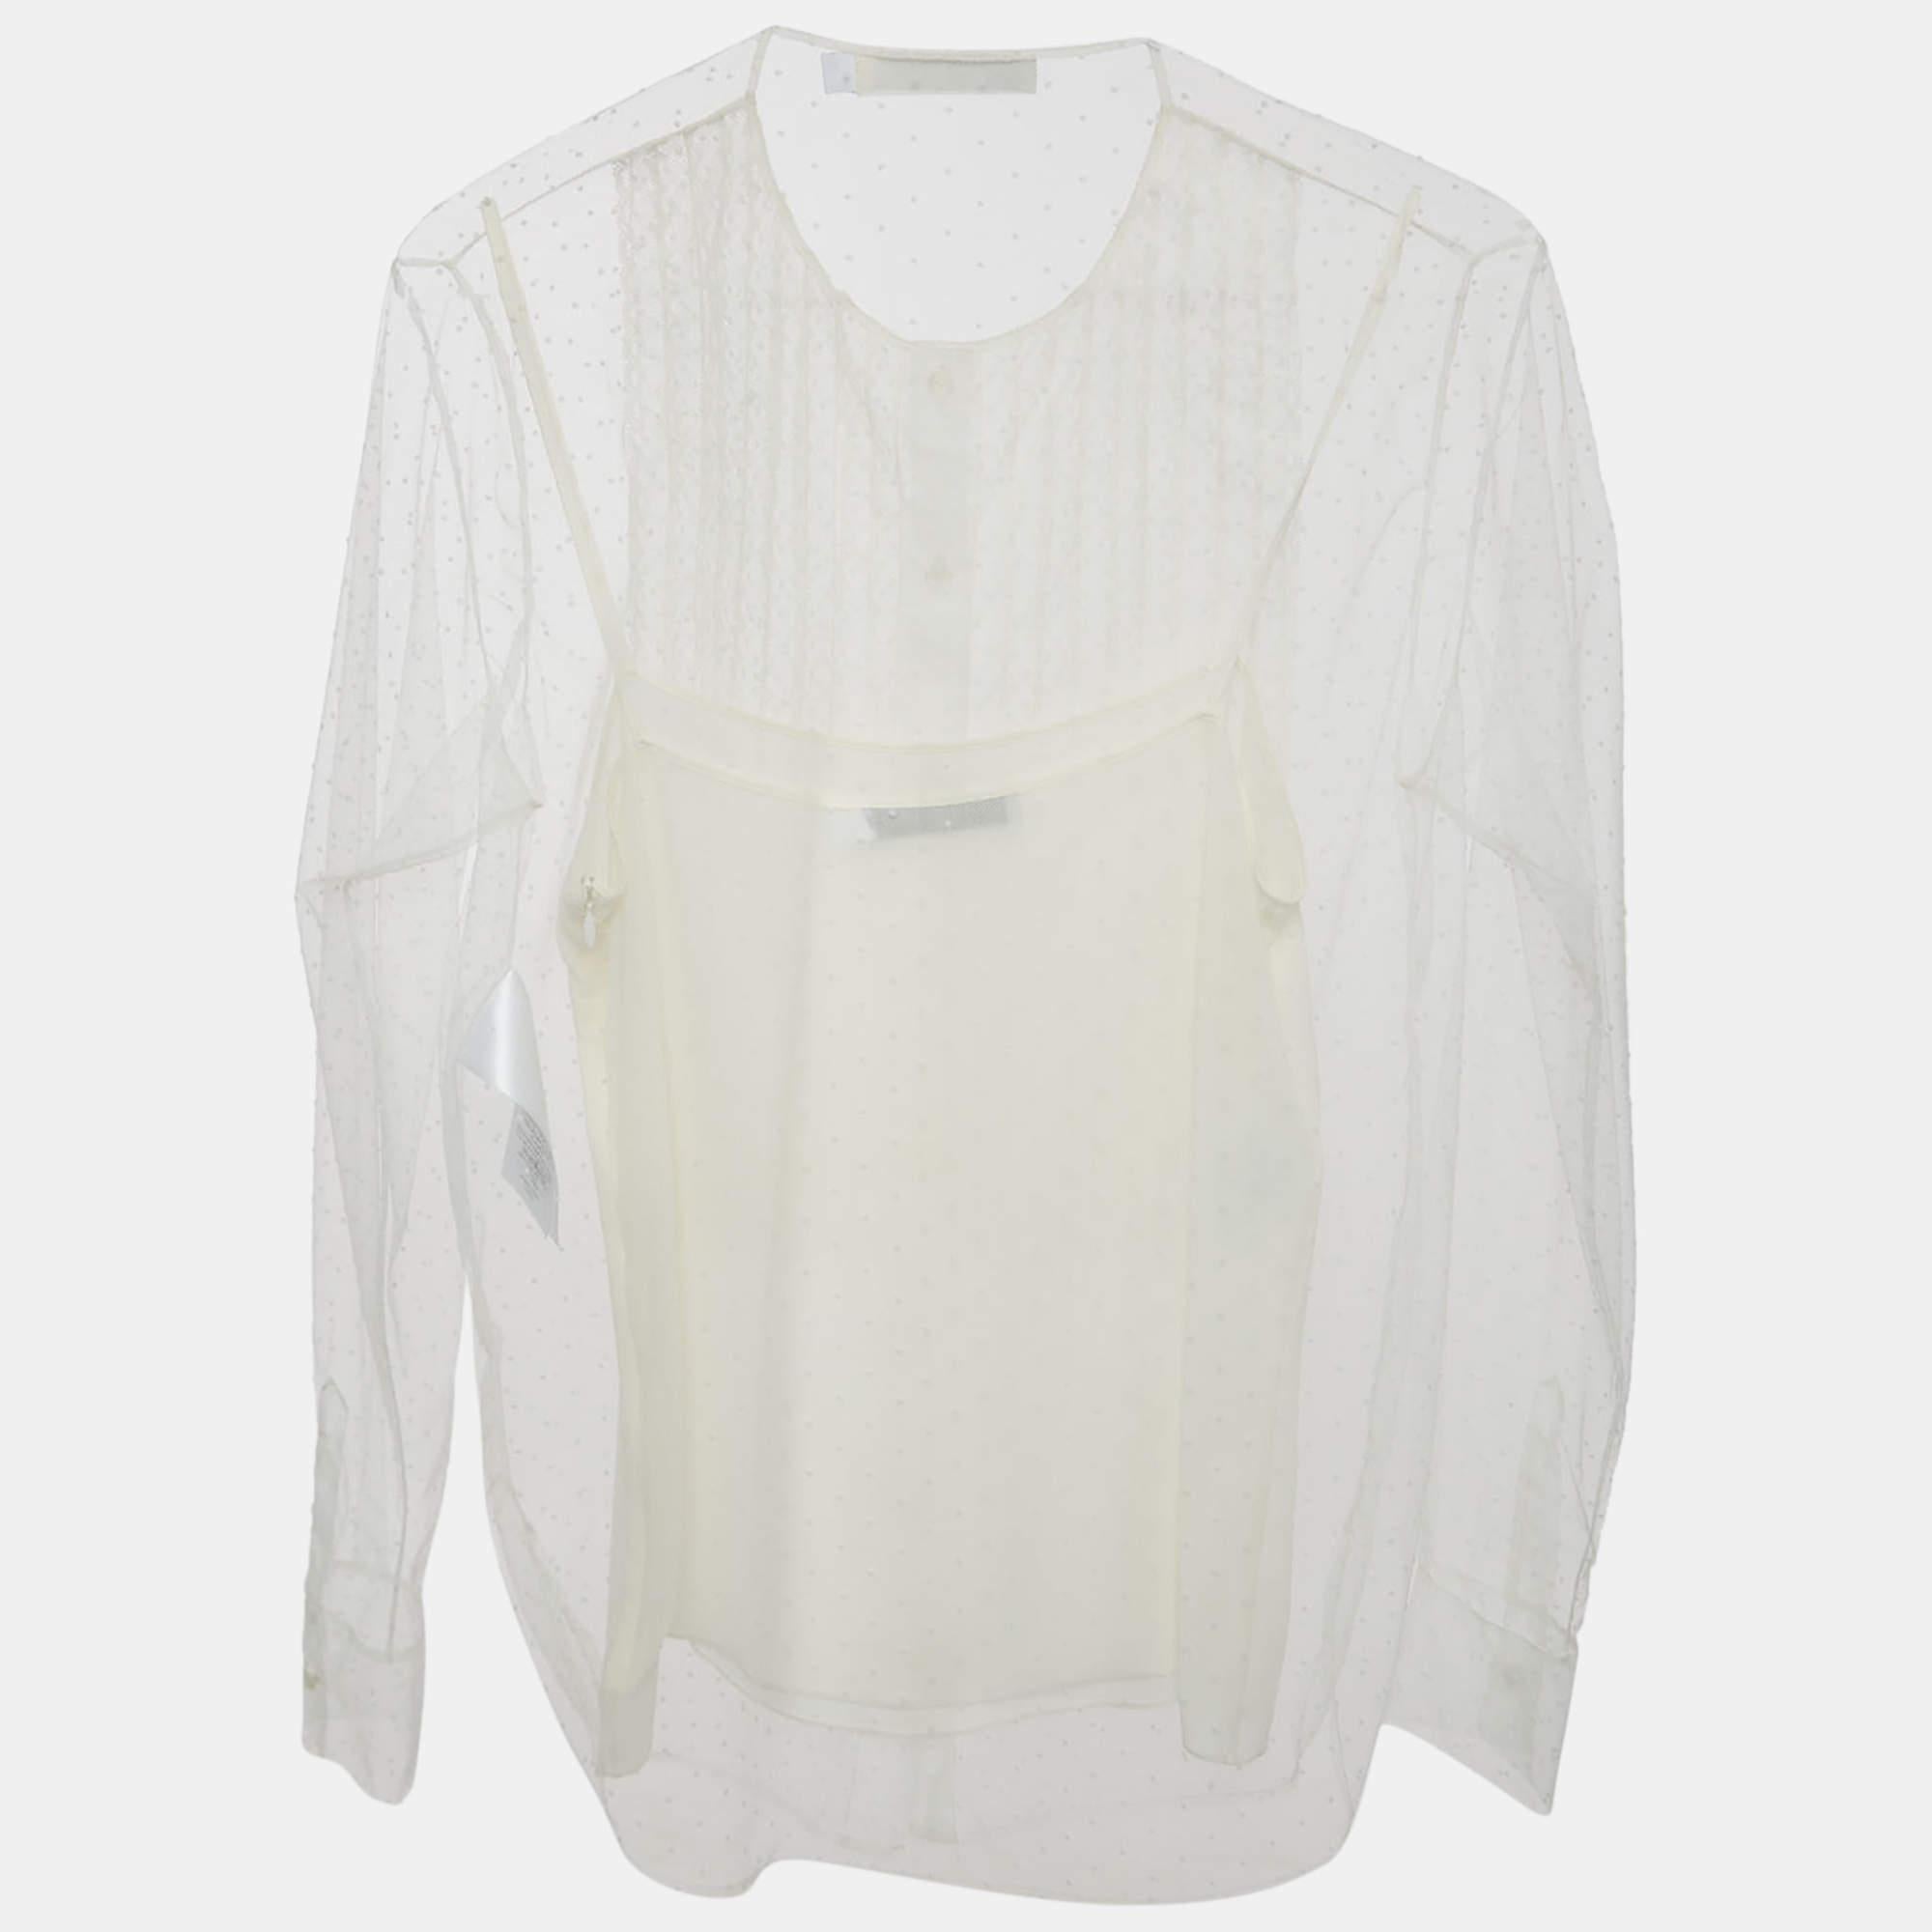 The Christian Dior blouse is an ethereal garment featuring delicate white tulle adorned with subtle, elegant dots. The blouse combines a timeless design with modern grace, showcasing Dior's iconic craftsmanship. Its sheer fabric and intricate